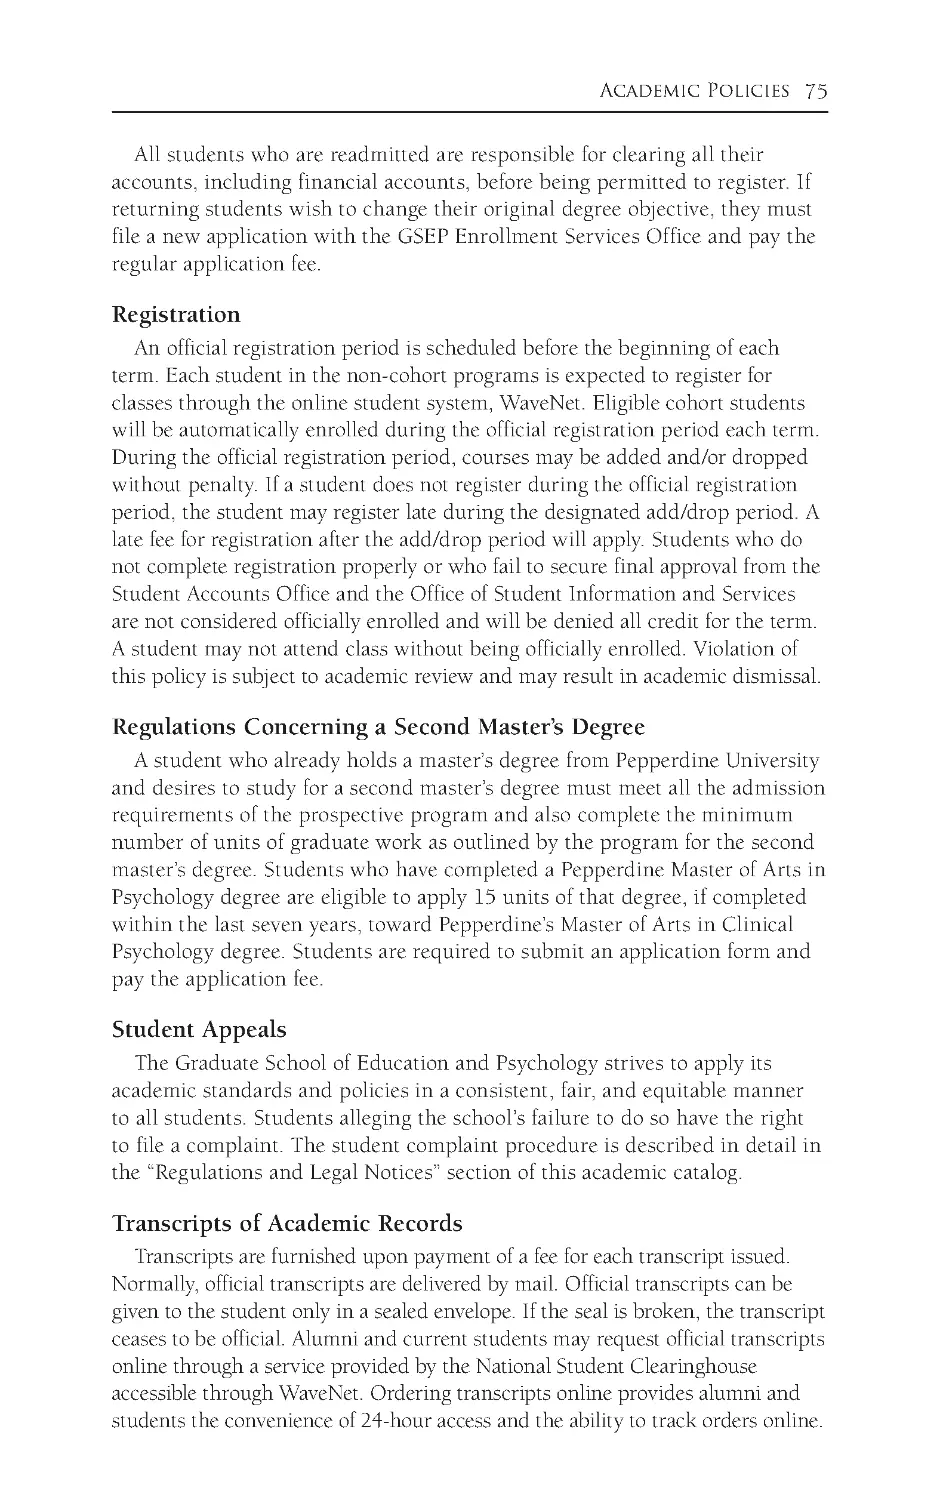 Registration
Regulations Concerning a Second Master’s Degree
Student Appeals
Transcripts of Academic Records